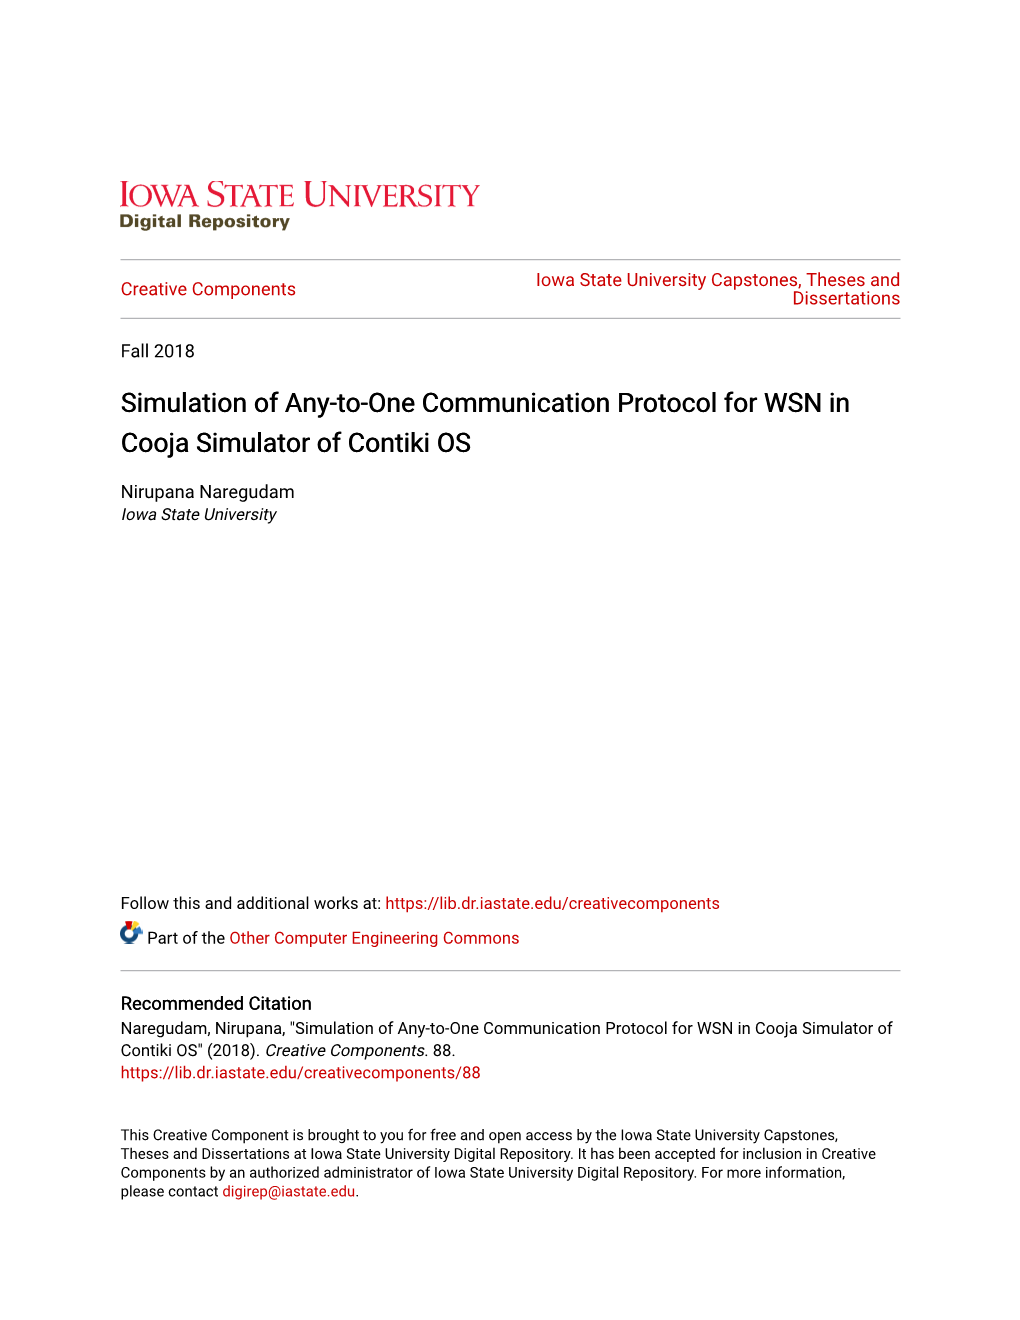 Simulation of Any-To-One Communication Protocol for WSN in Cooja Simulator of Contiki OS